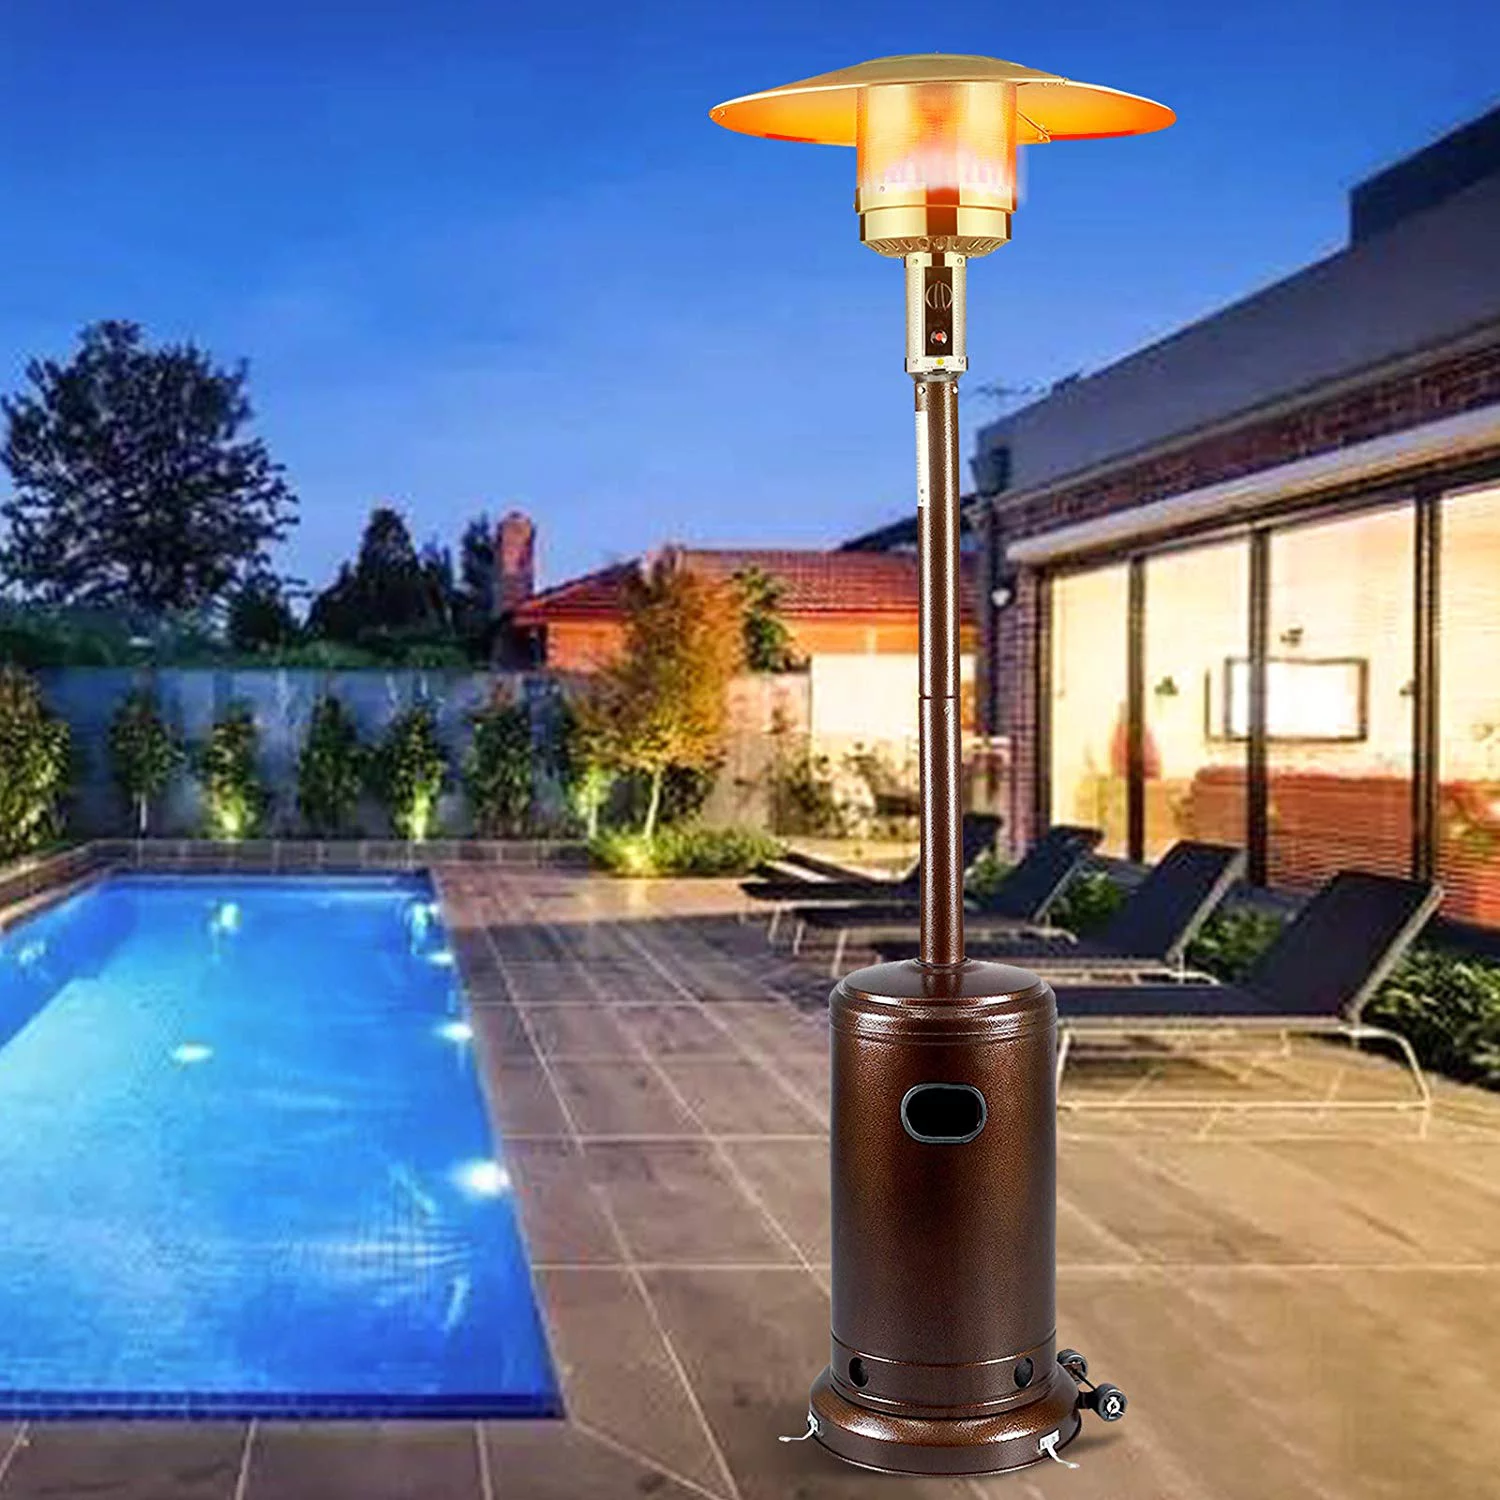 How Much Clearance Does A Patio Heater Need